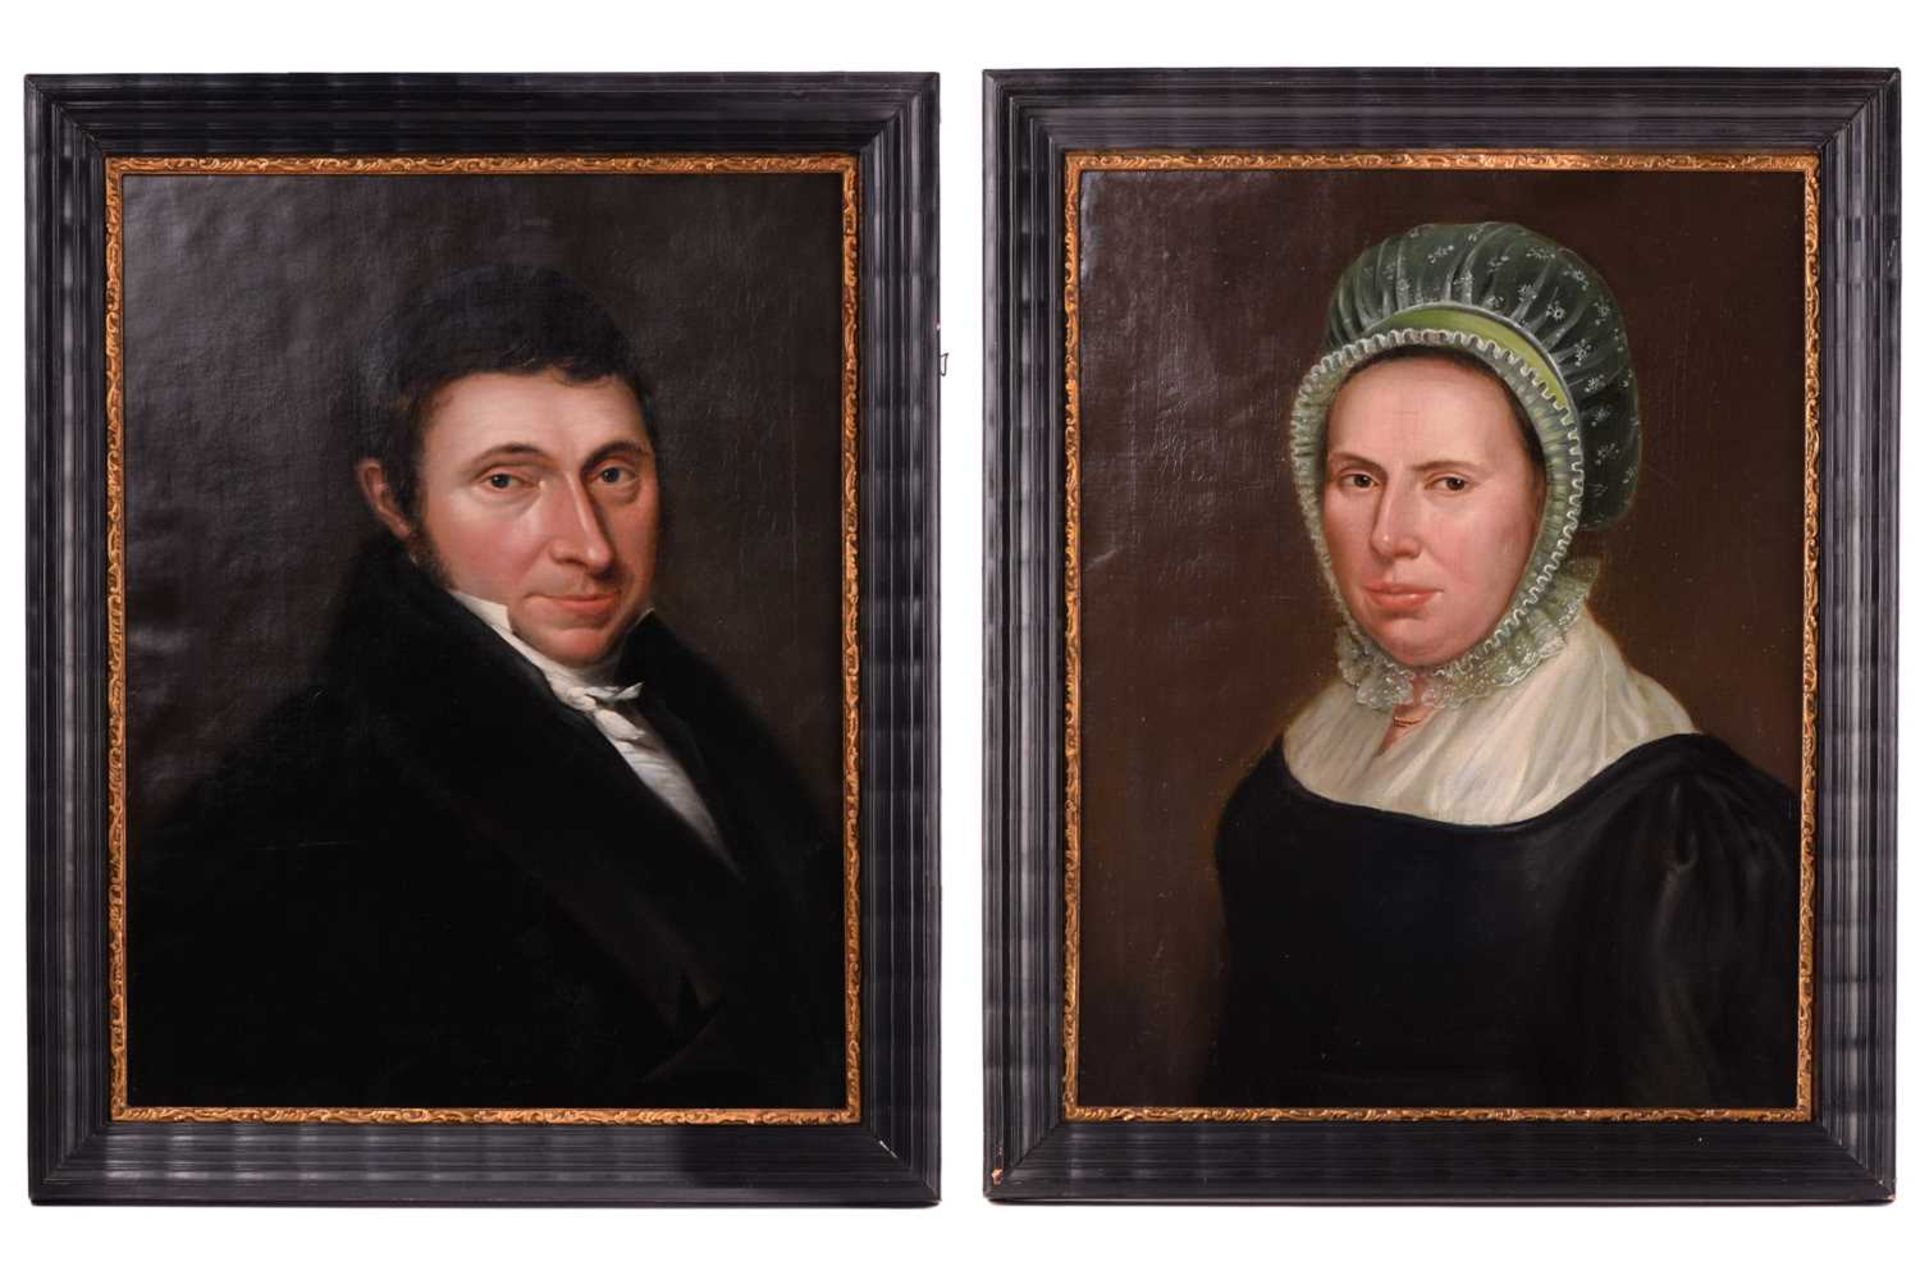 Mid-19th century, possibly Dutch School, a pair of portraits depicting a lady and a gentleman,